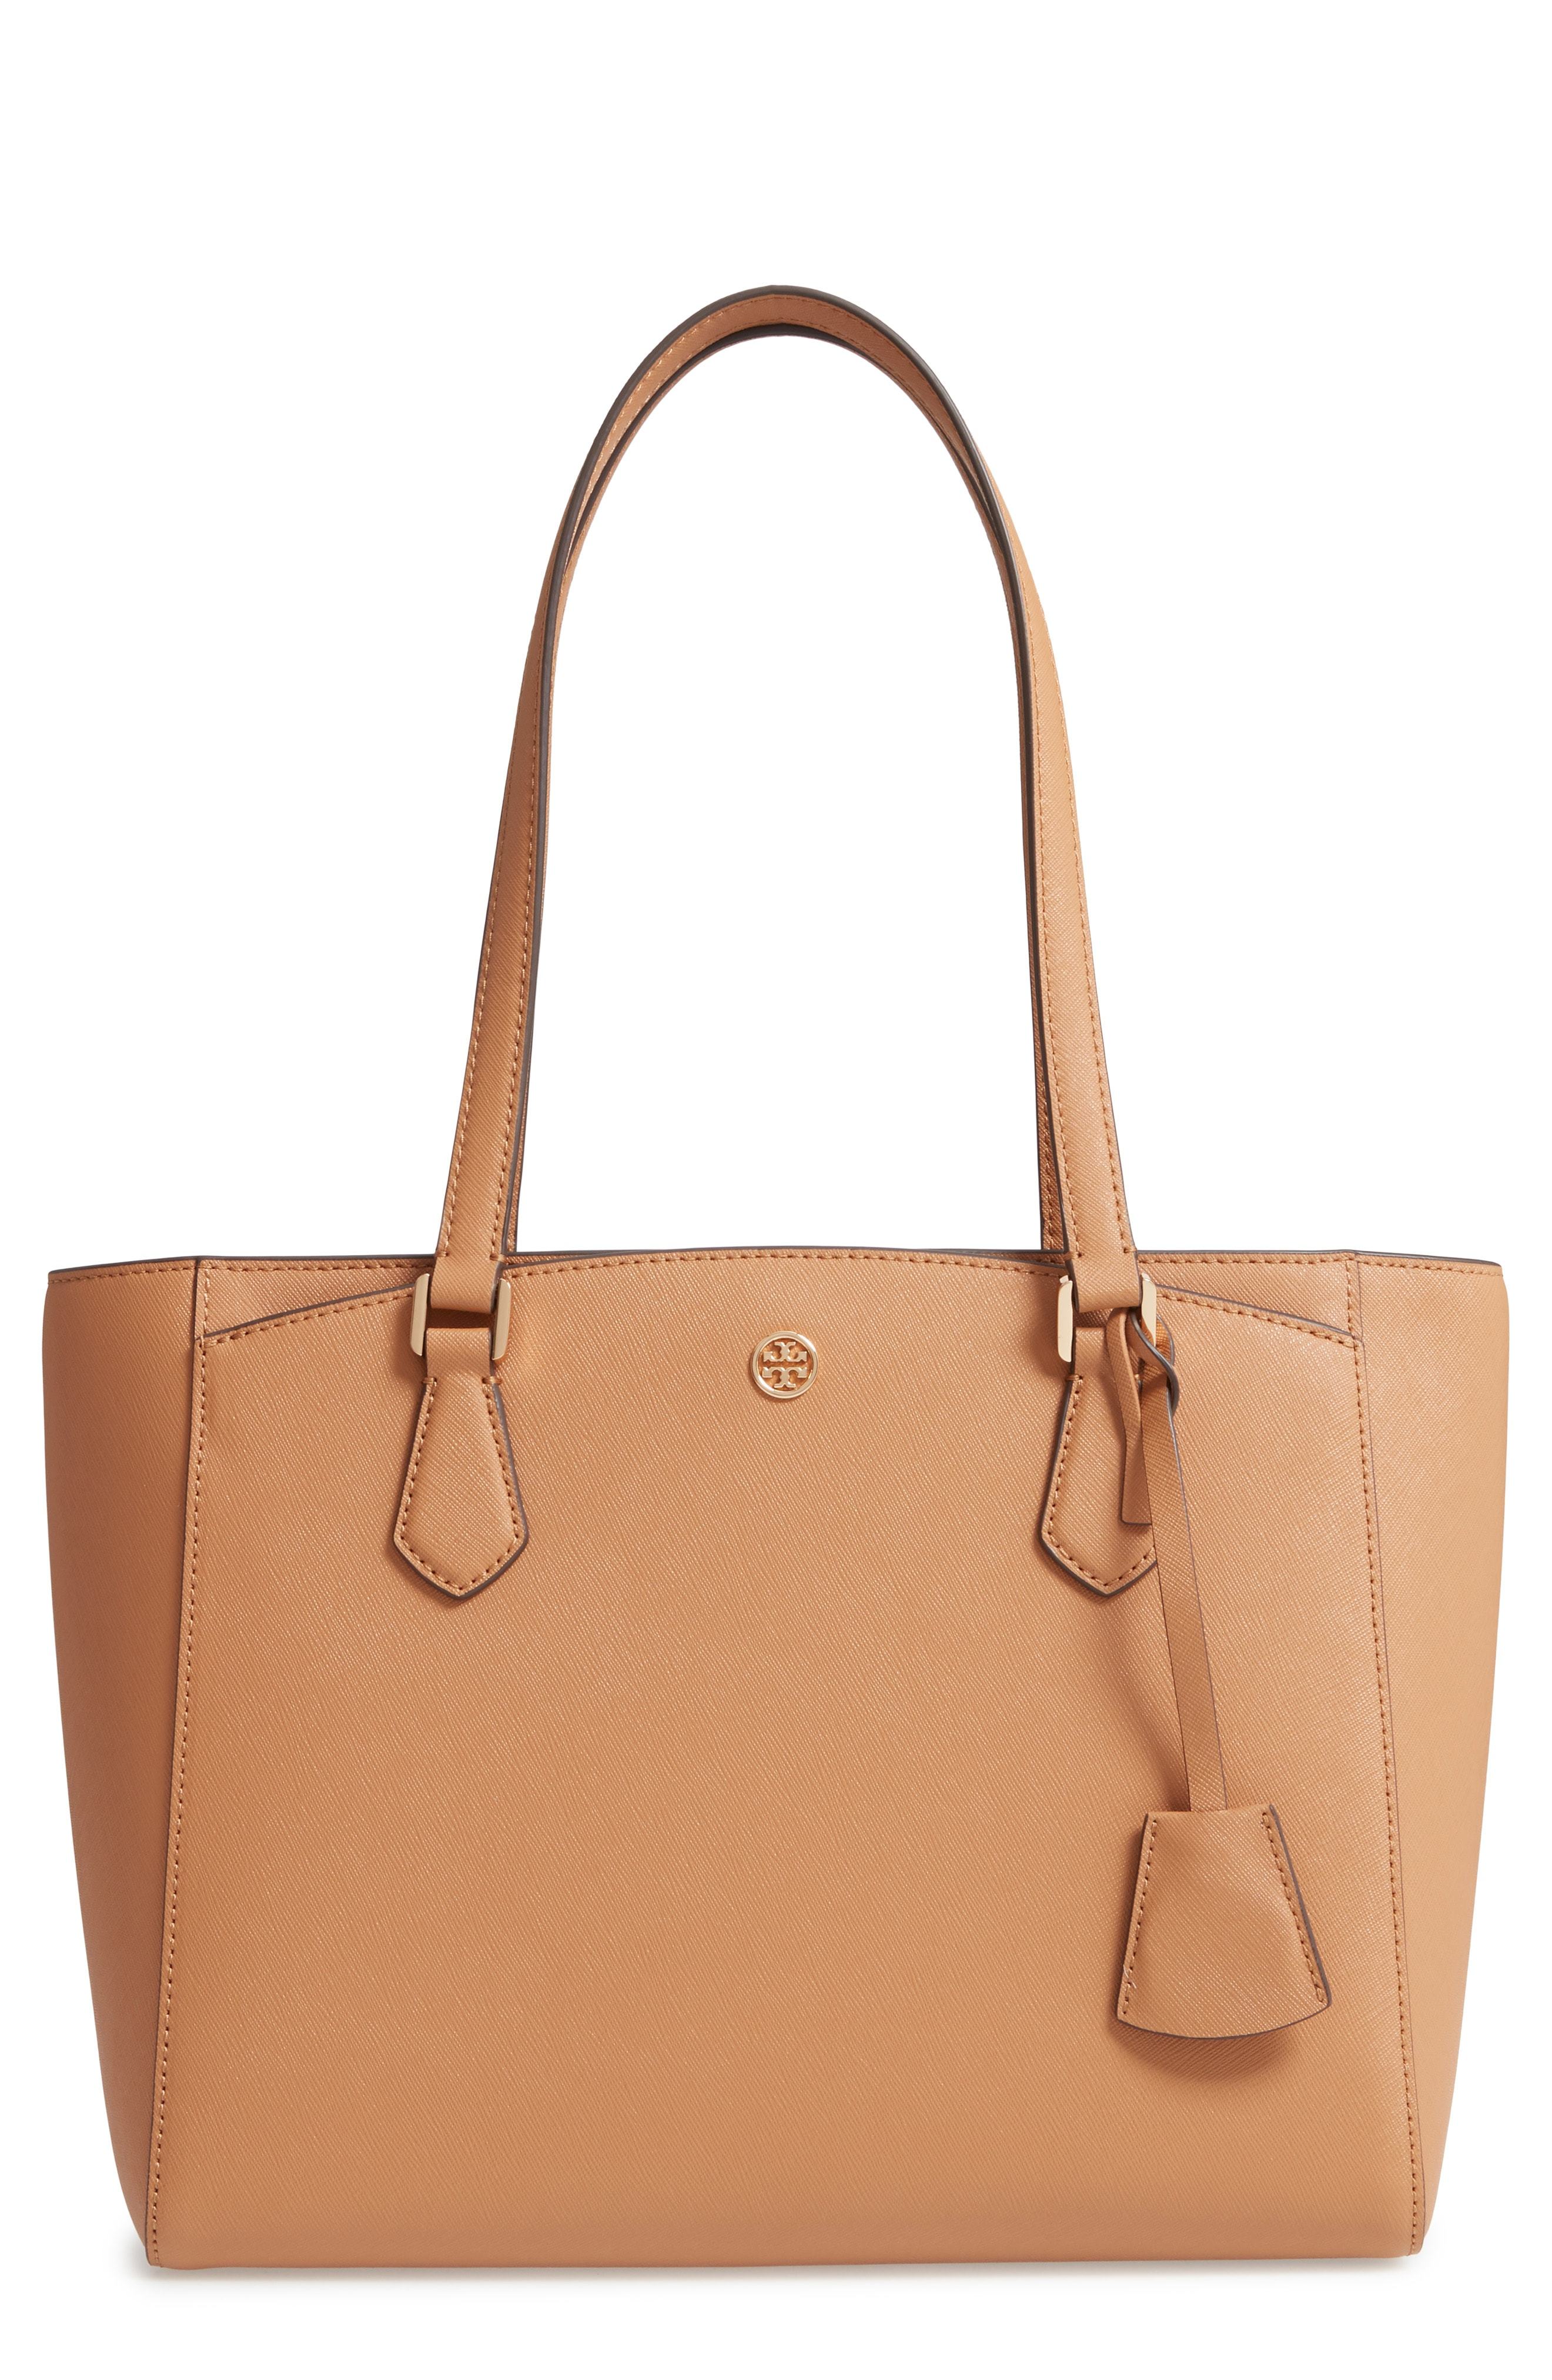 Tory Burch Small Robinson Saffiano Leather Tote, $298 | Nordstrom |  Lookastic